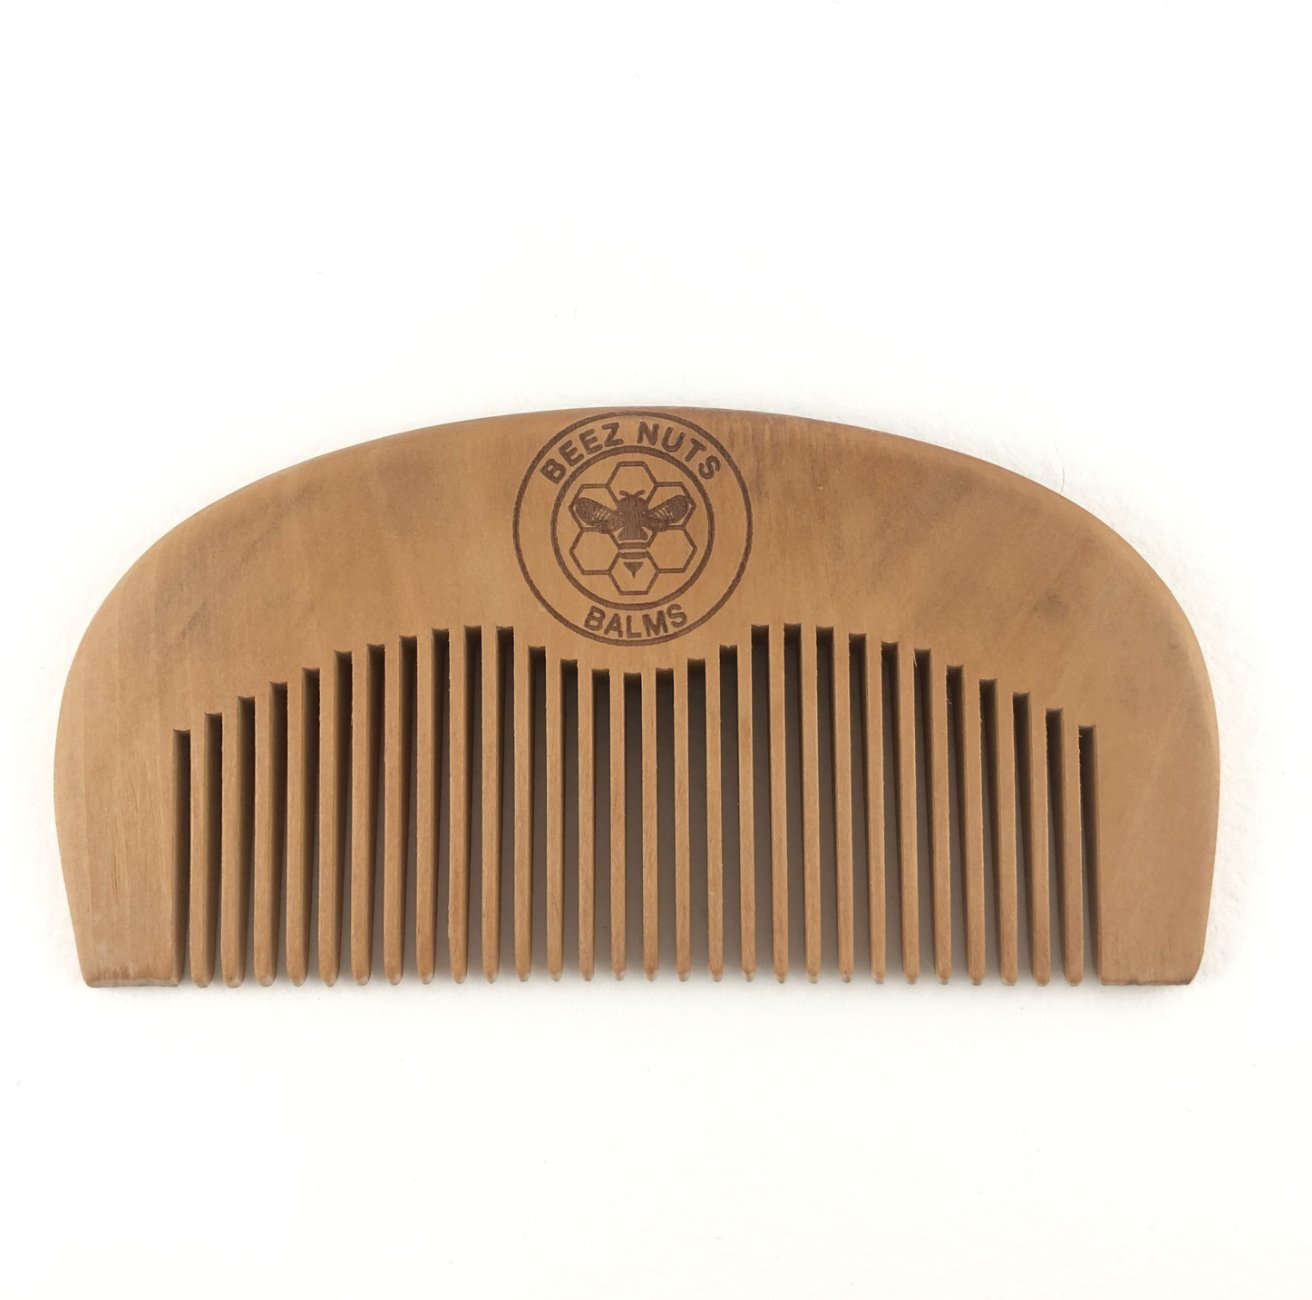 Hair & Beard Comb by Beez Nuts-Beez Nuts-Hair Comb-Stockton Farm